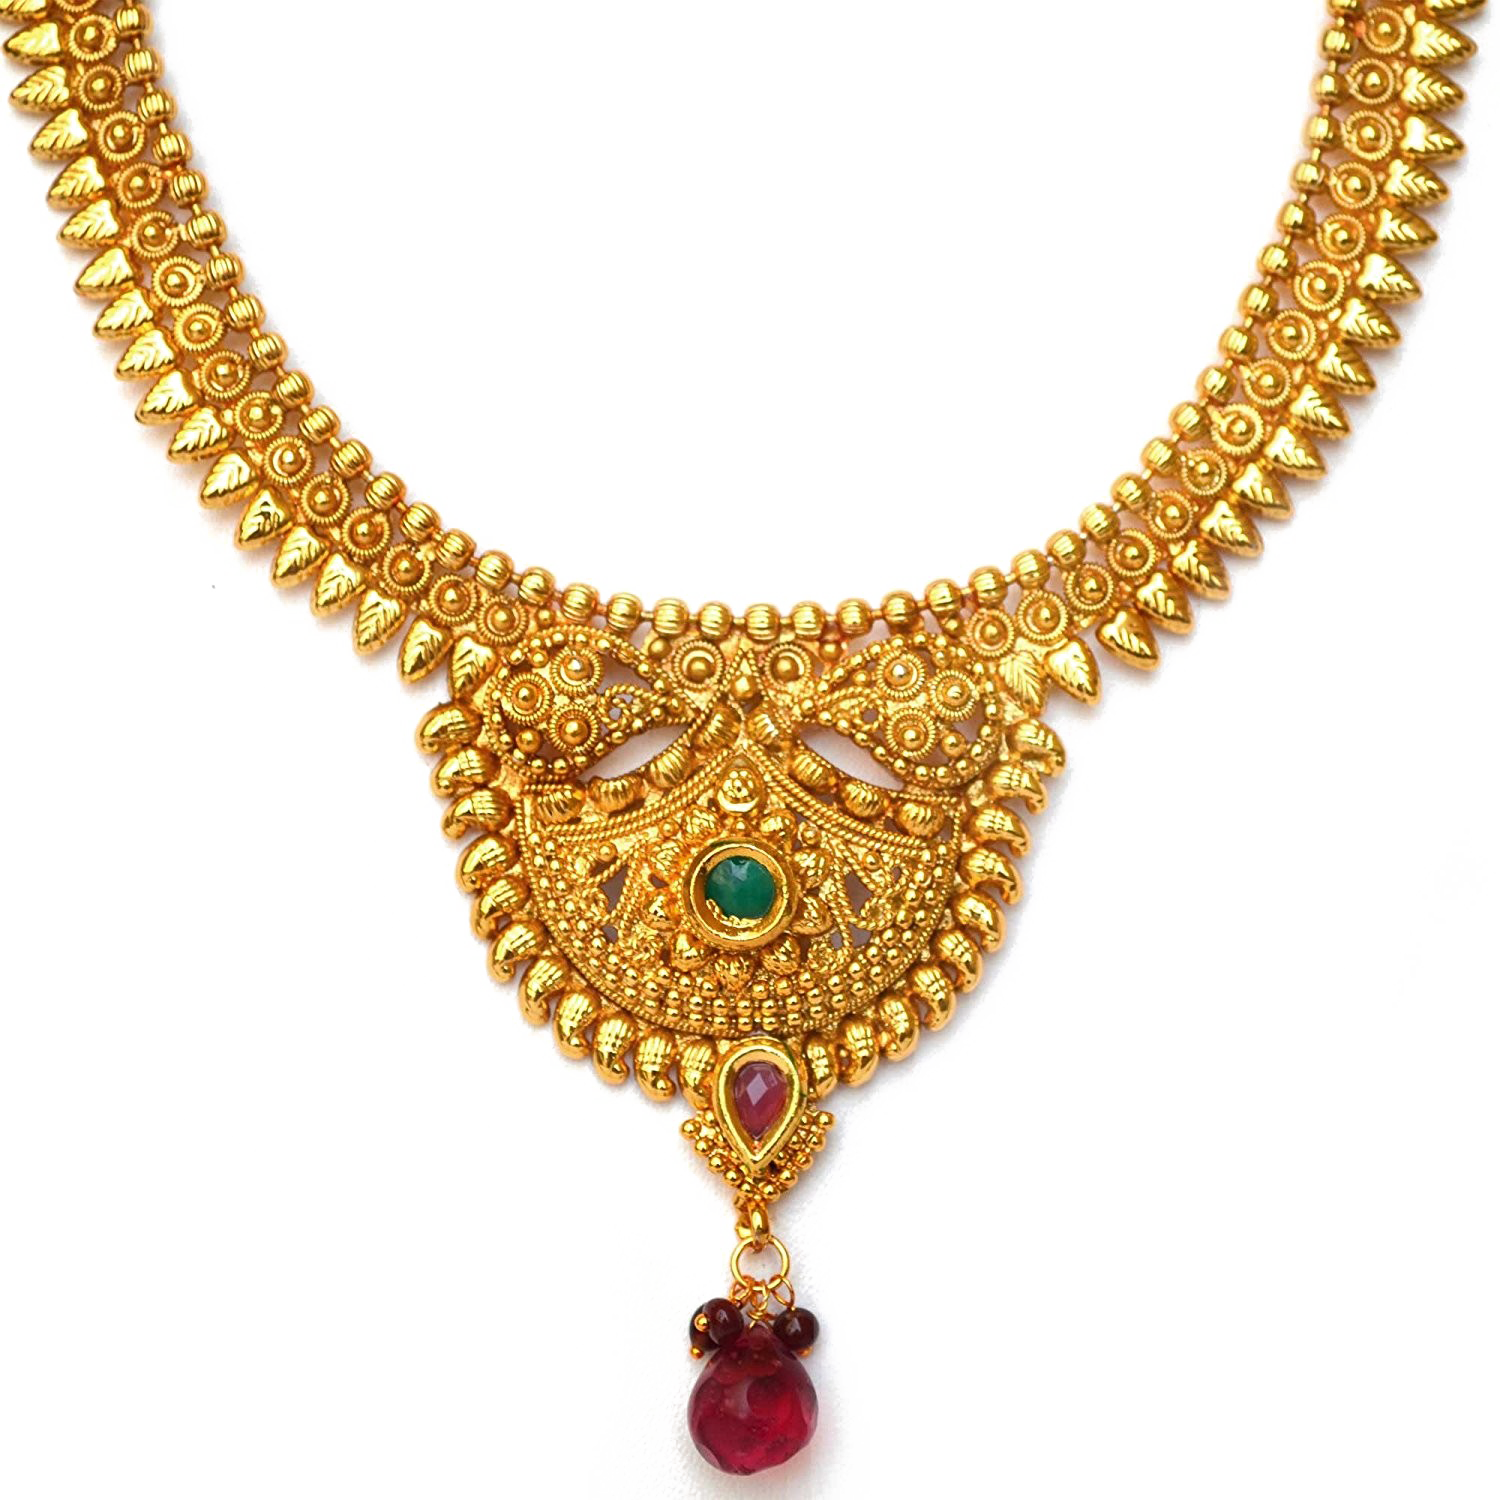 Necklace Png Images Jewellers Necklace Designs Pictures Free Transparent Png Logos